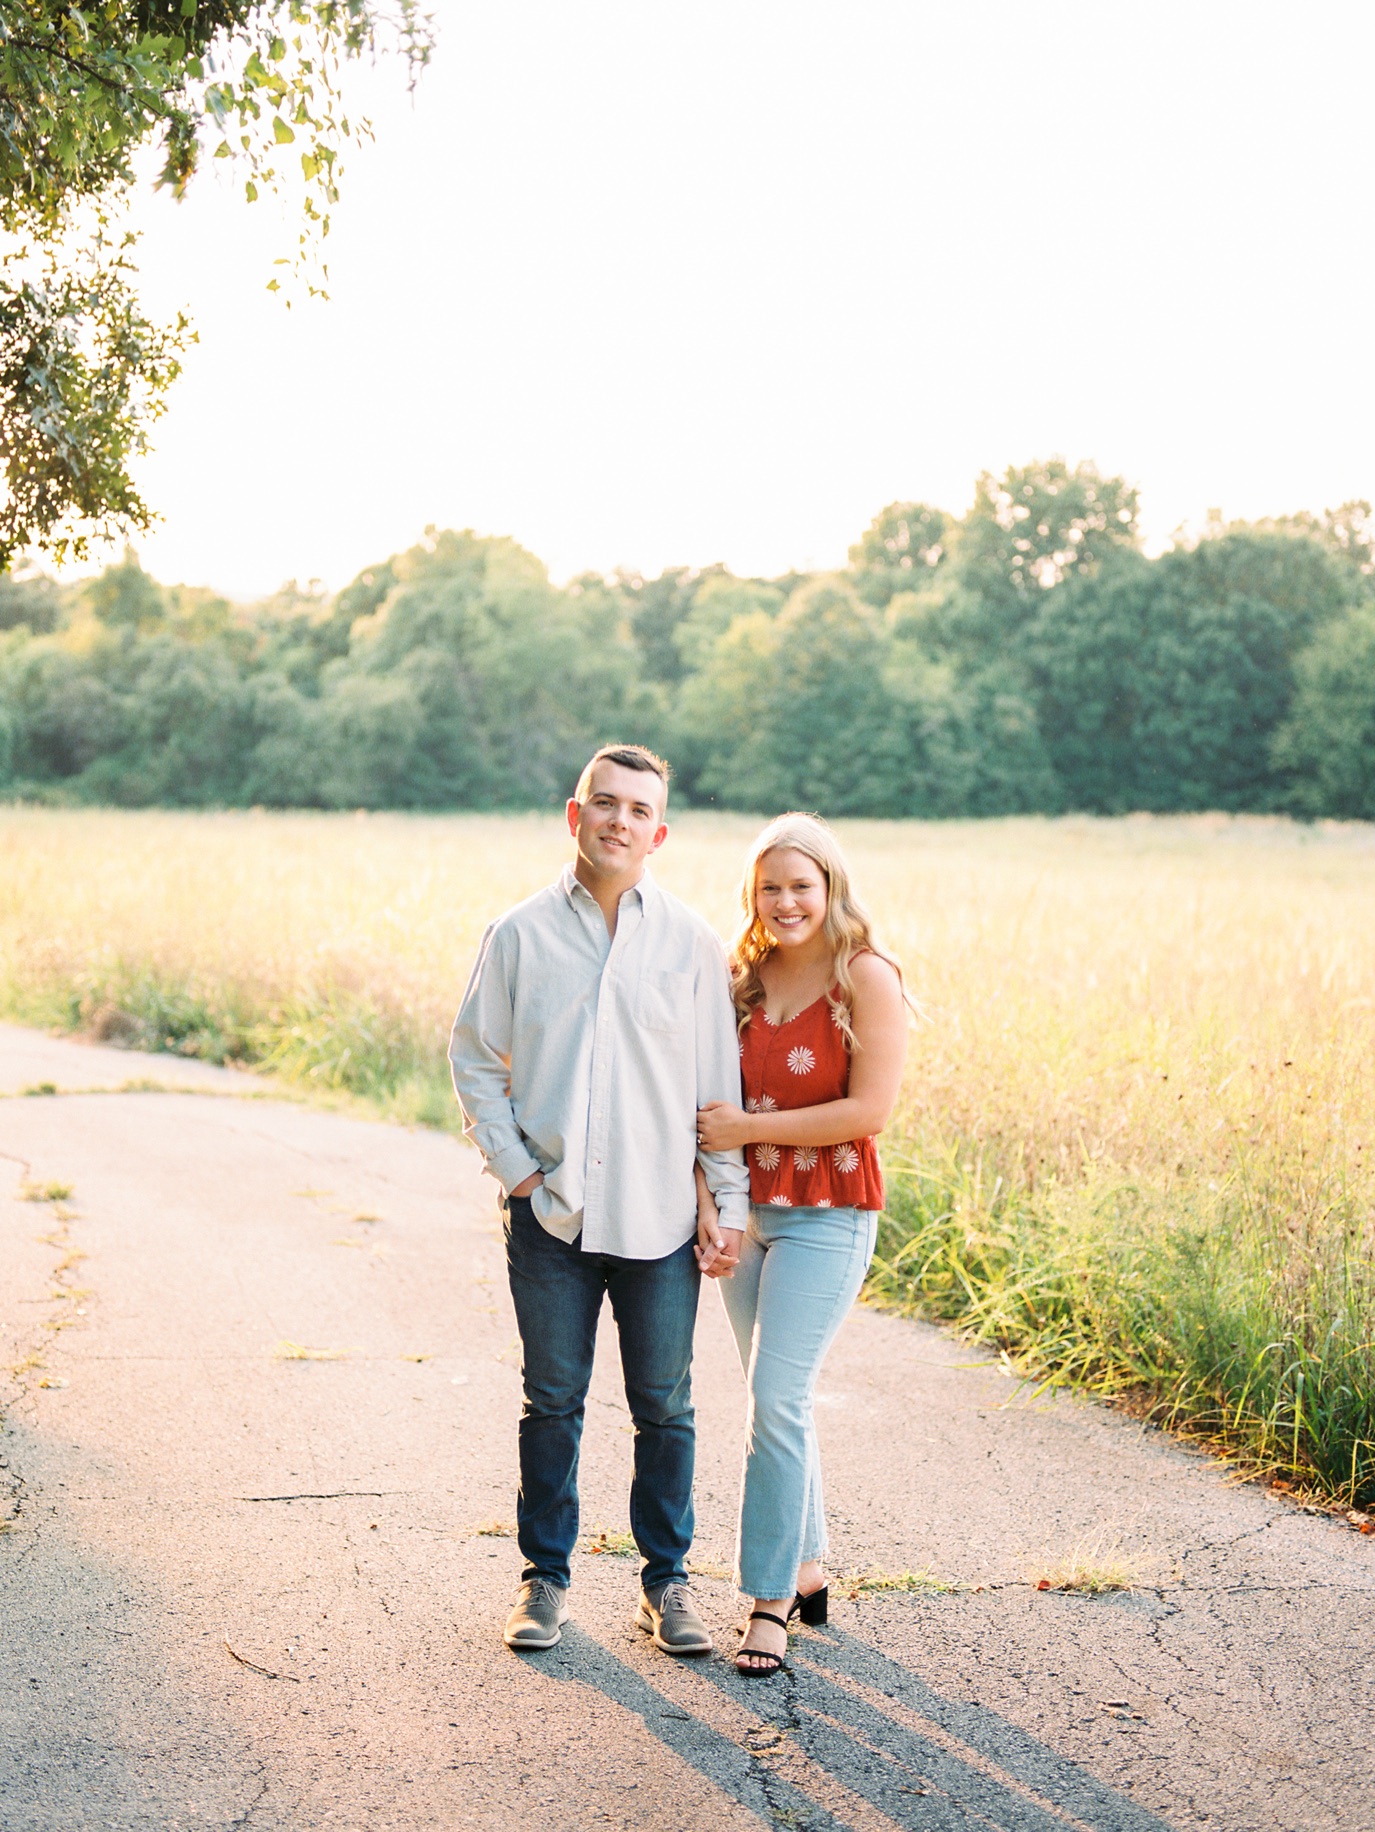 Summer Engagement Pictures in Tulsa